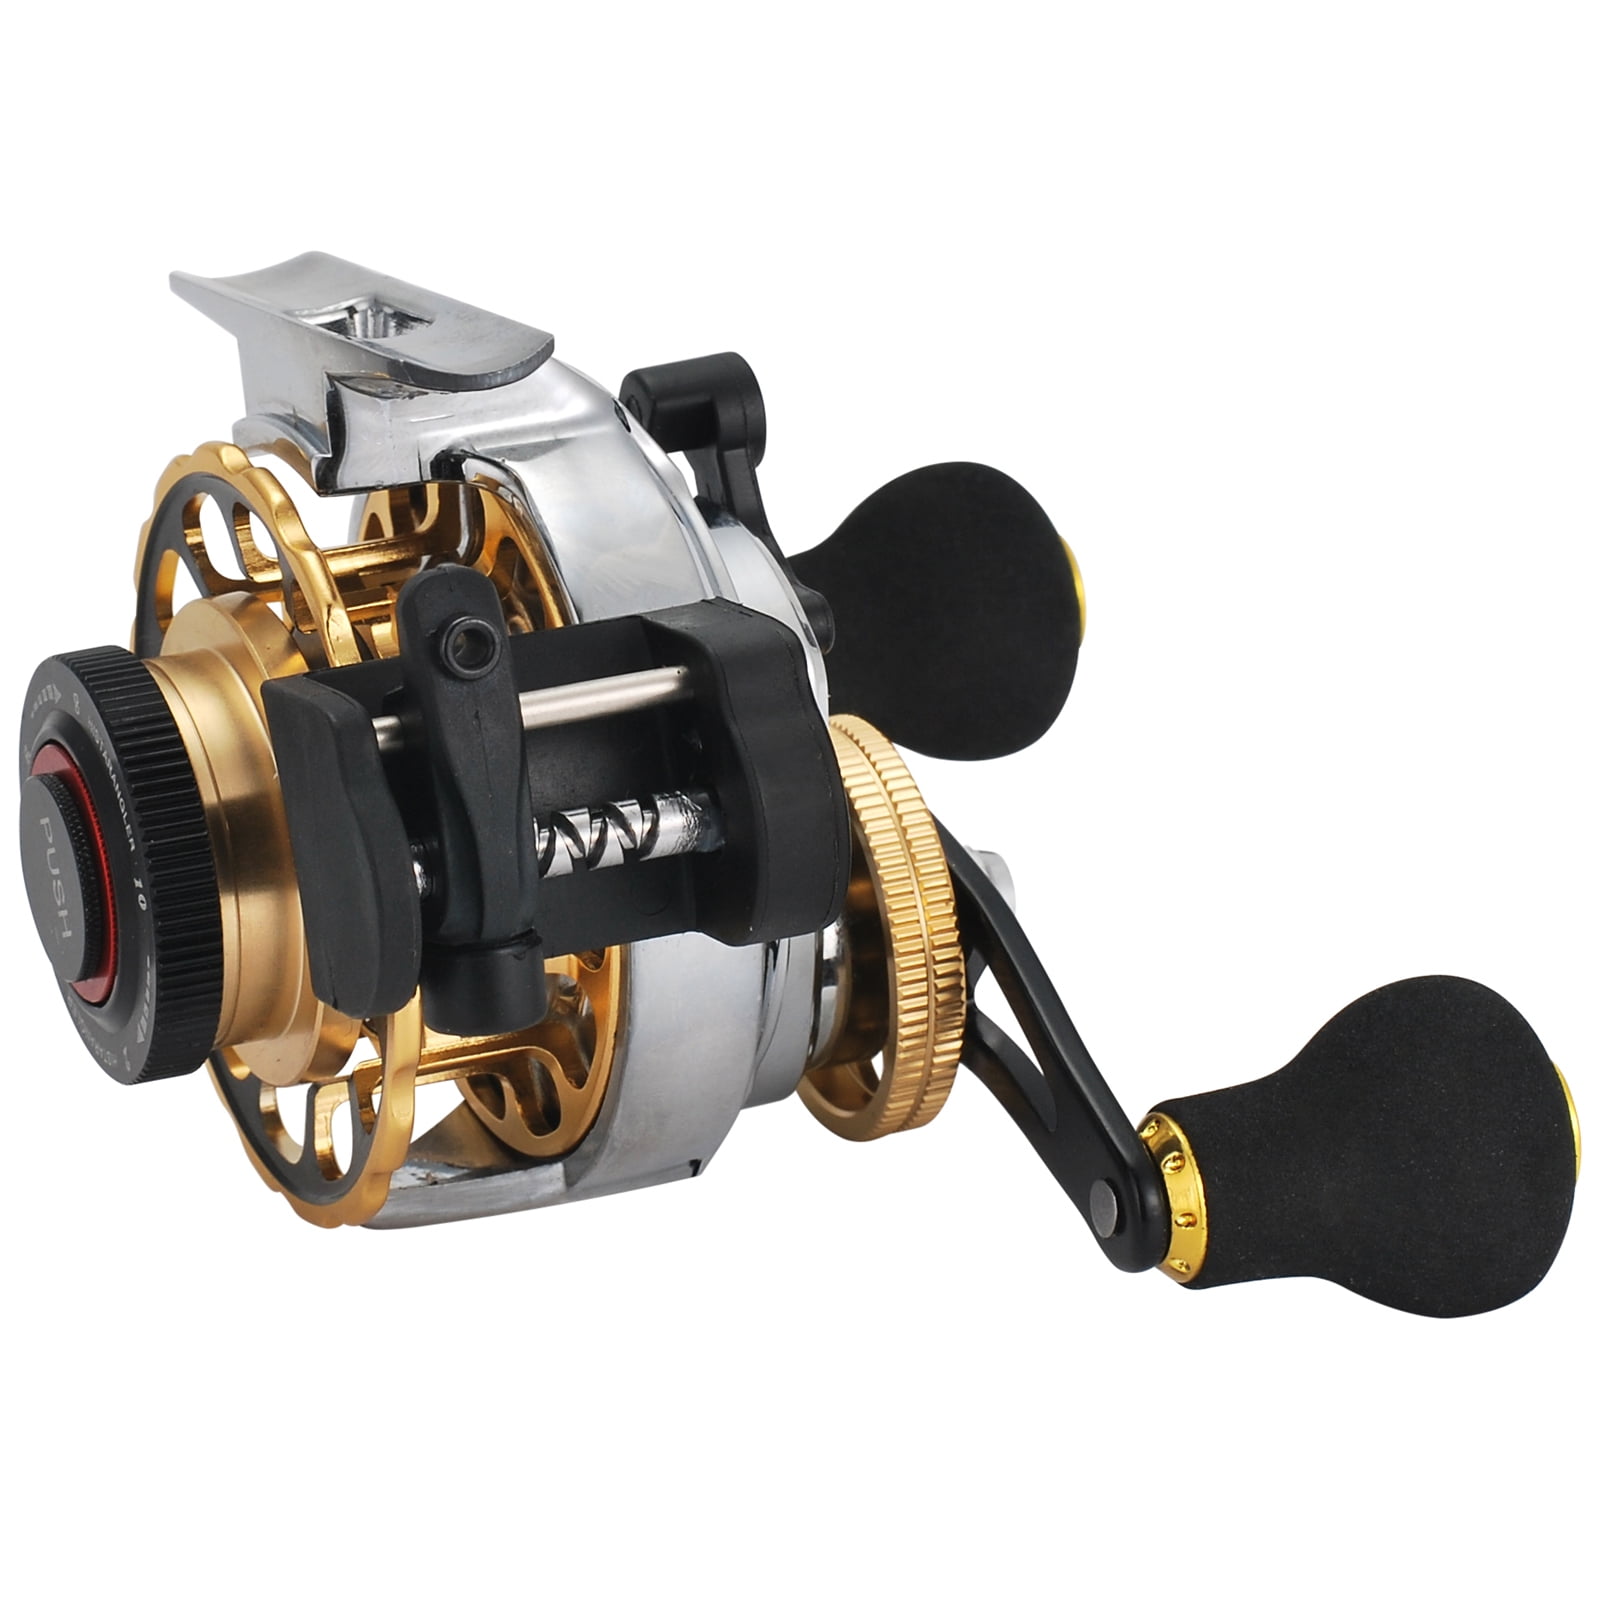 CAMEKOON Fishing Reel 5.5:1 Gear Spinning Fishing Reel with Aluminum Spare Spool 